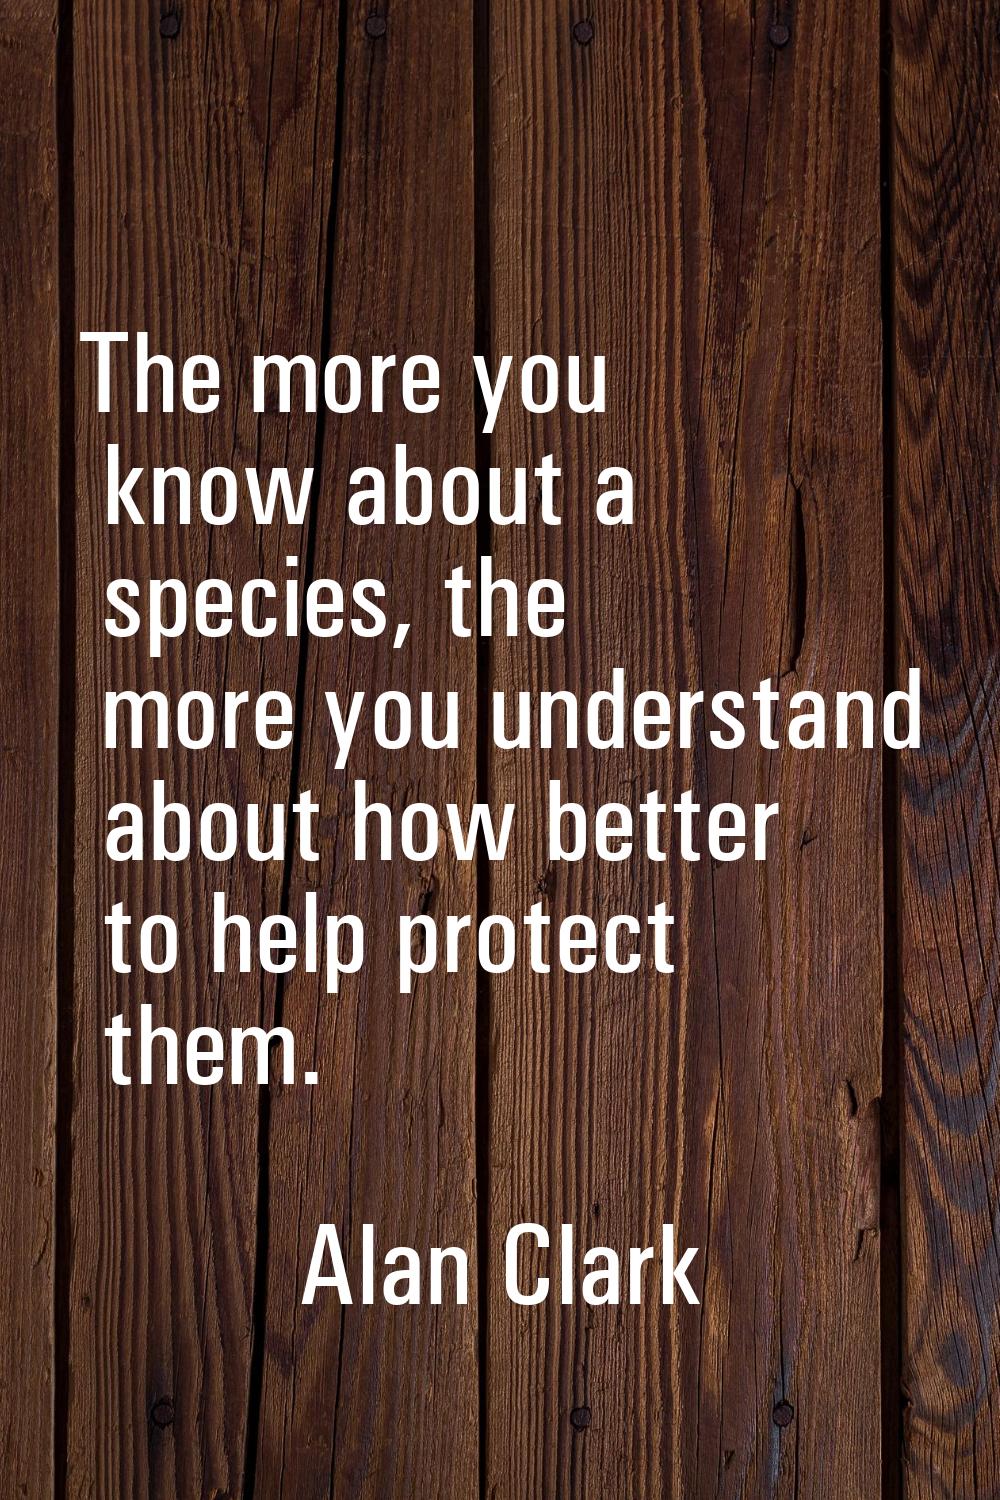 The more you know about a species, the more you understand about how better to help protect them.